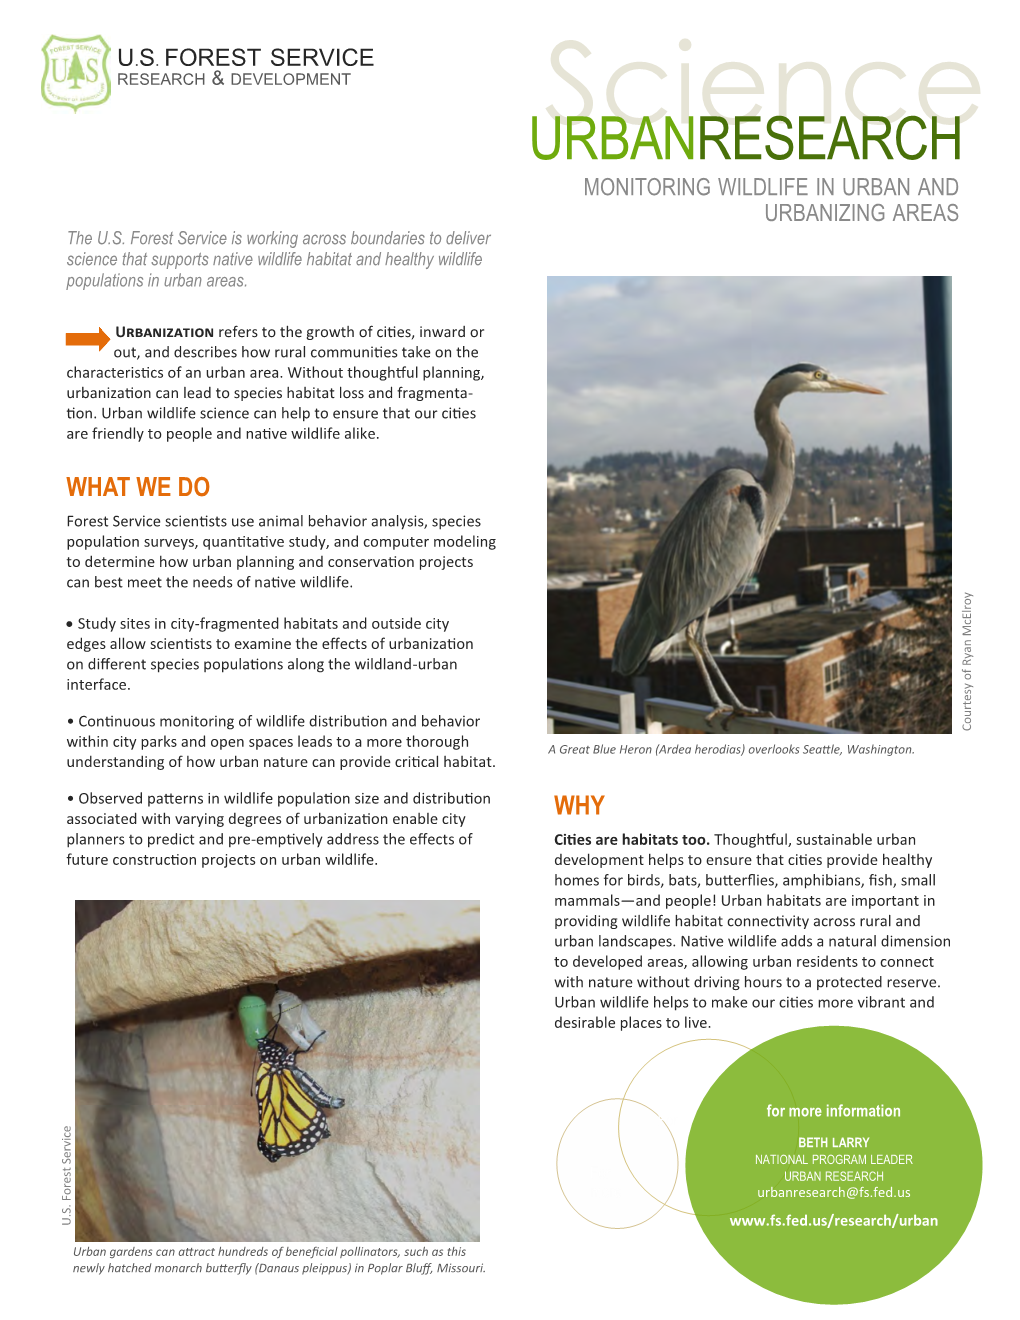 View Our Urban Wildlife Research Brief